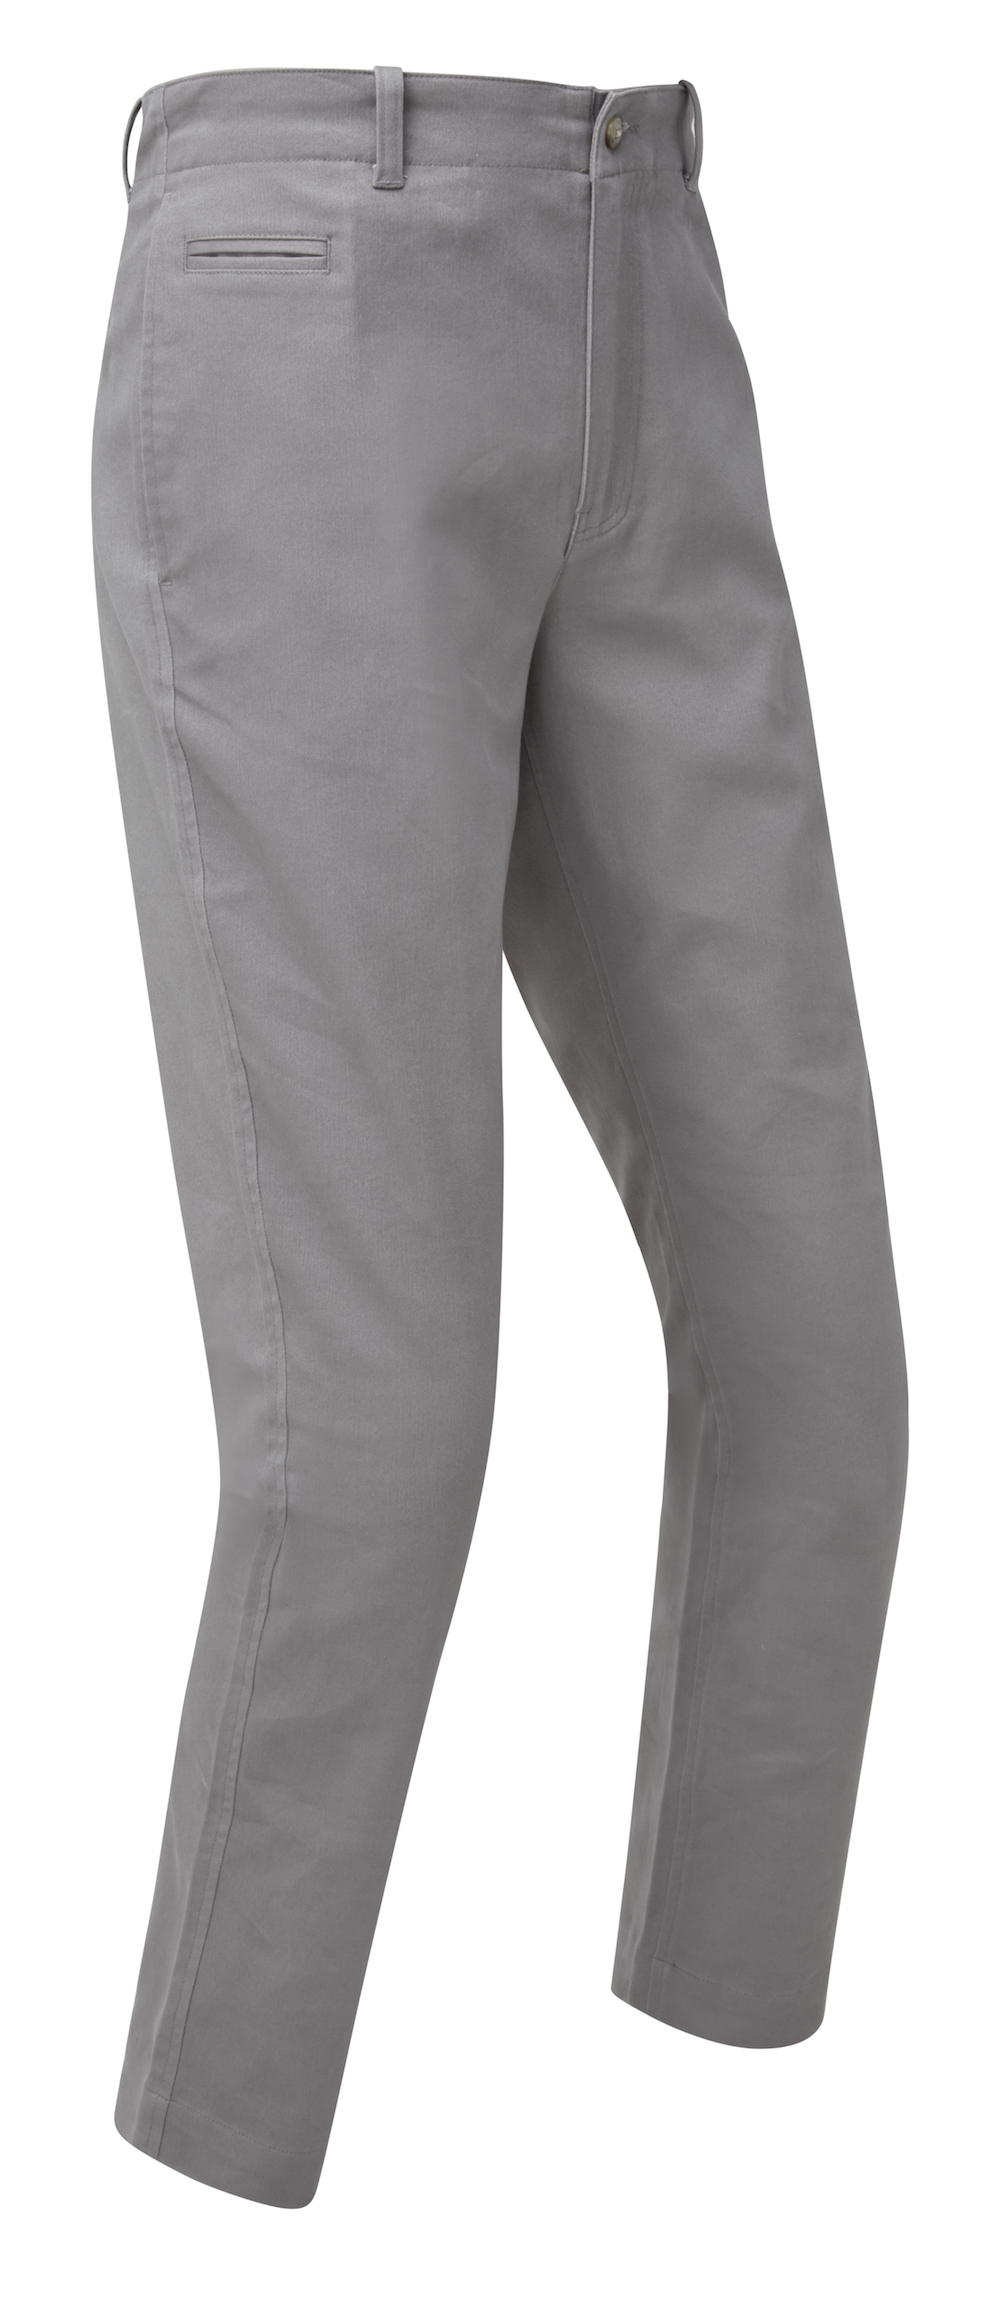 FJ Buxur Chino Tapered Fit